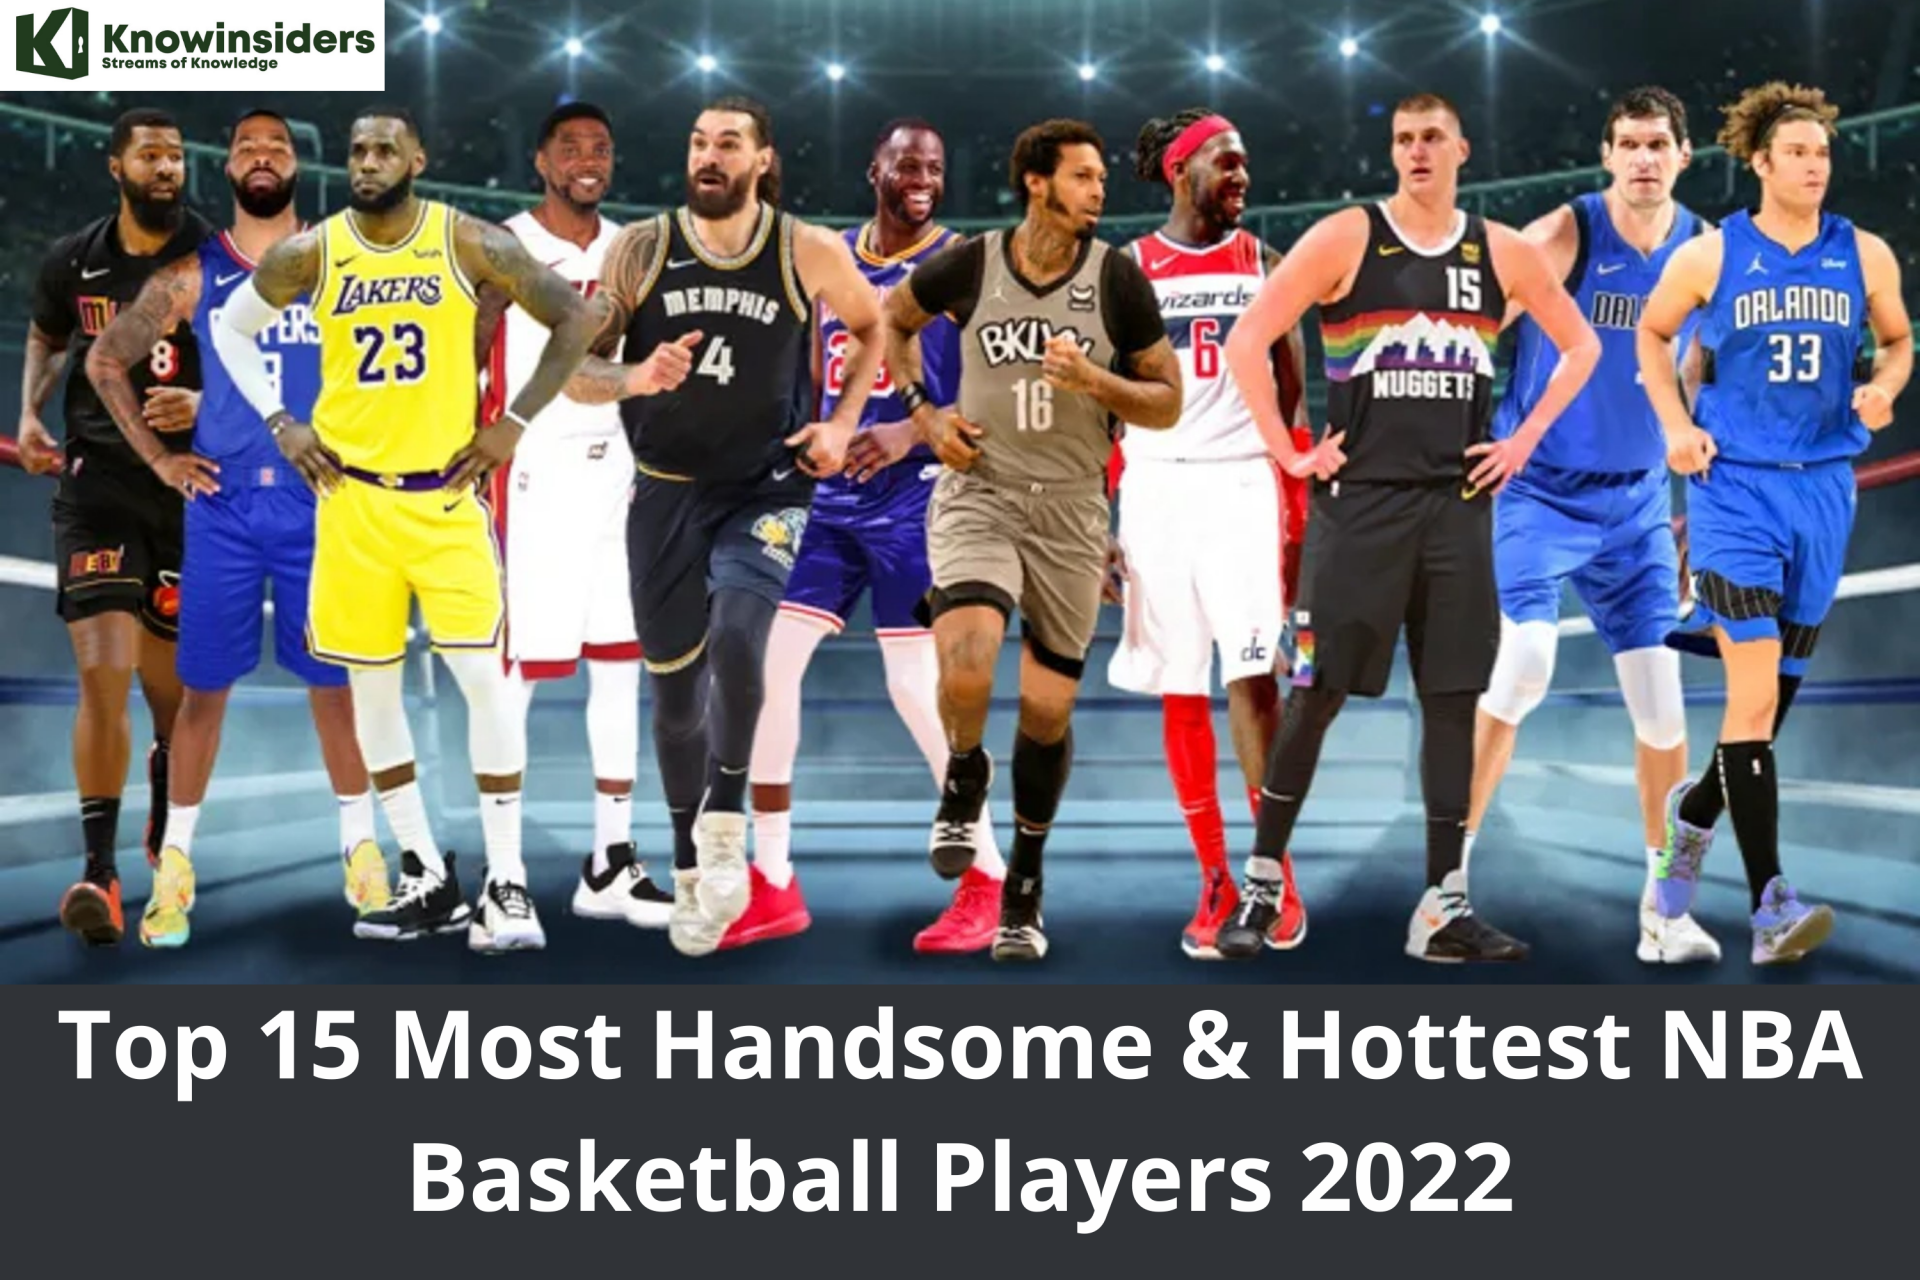 Top 15 Most Handsome & Hottest NBA Basketball Players 2022/2023